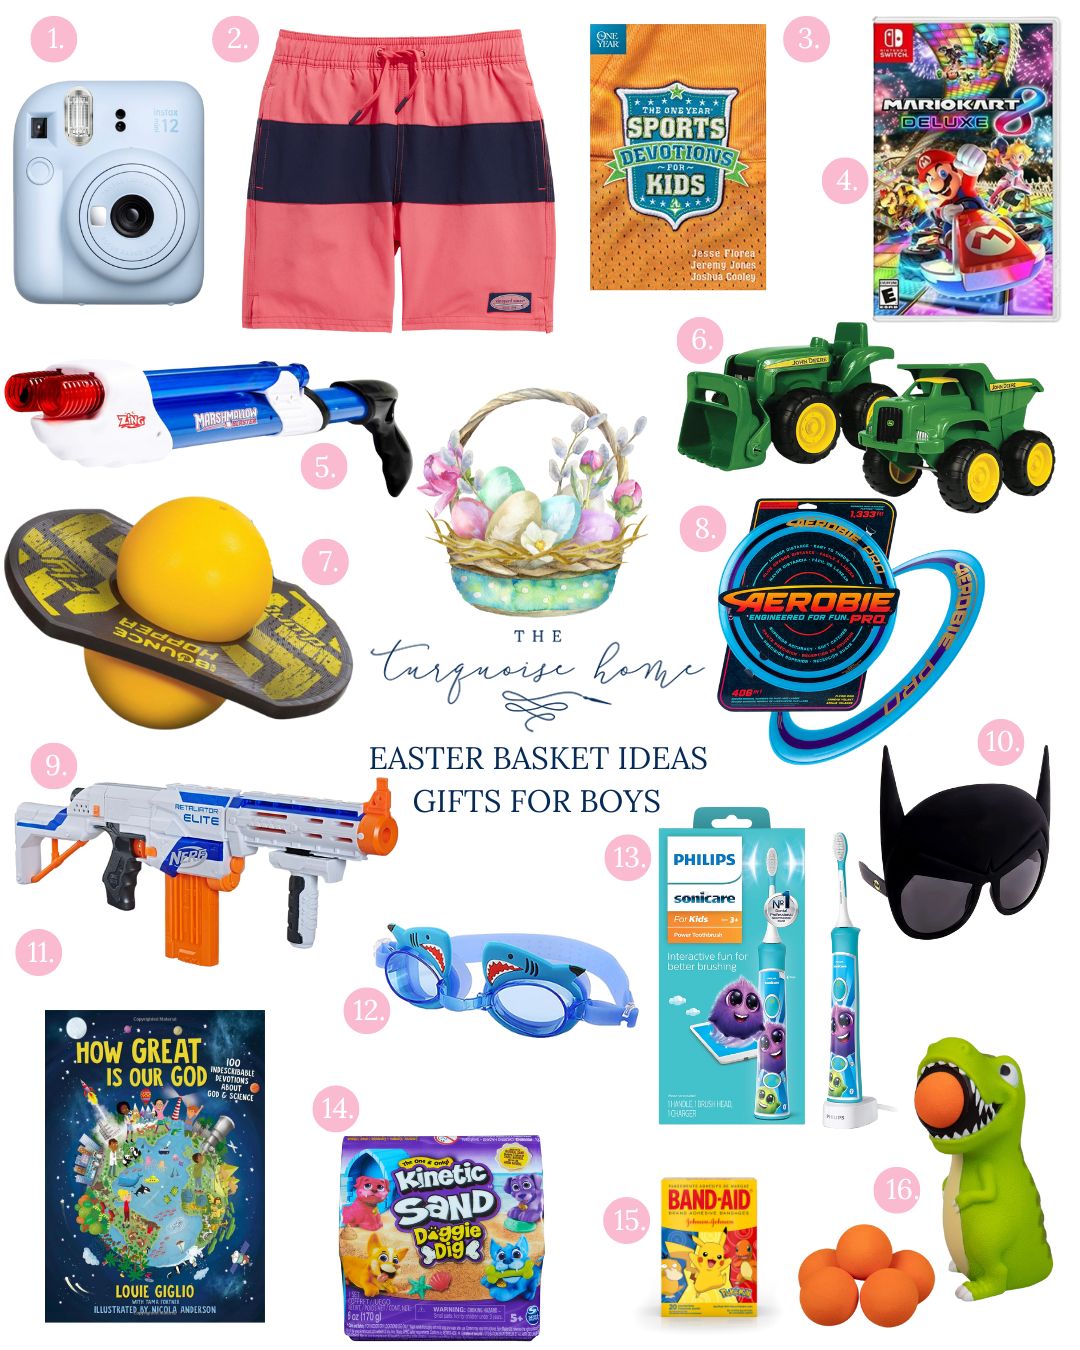 The Best Easter Basket Ideas for Kids - The Turquoise Home